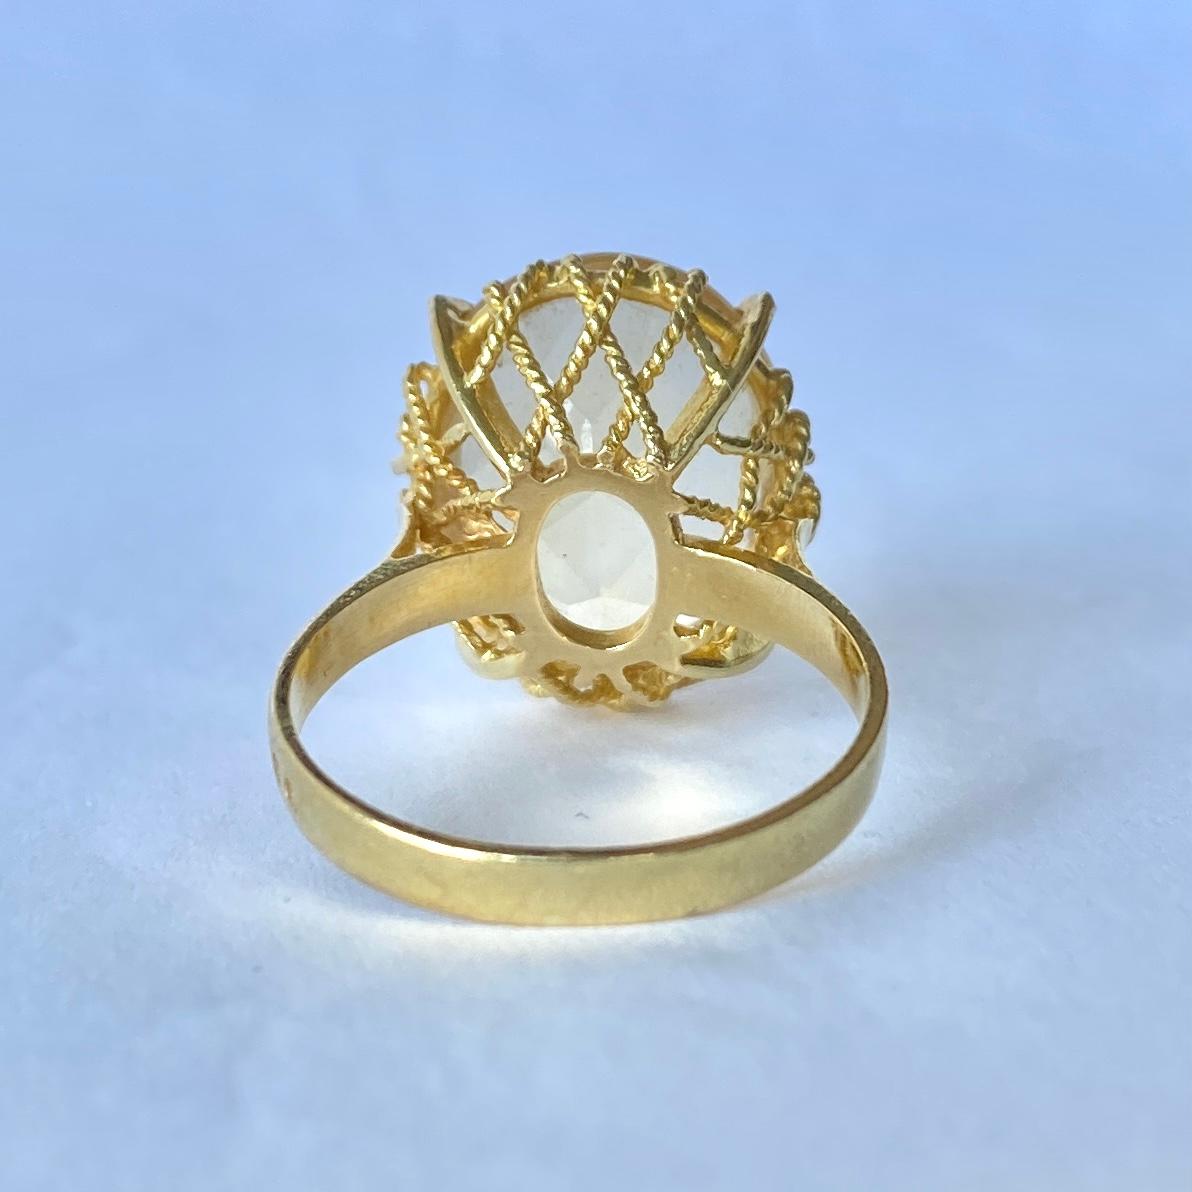 The setting this ring is made up of stunning rope twisted basket weave detail which cradles the gorgeous yellow citrine stone. The detail is exquisite and unusual. 

Ring Size: N 1/2 or 7 
Stone Dimensions: 17x14mm 

Weight: 6.2g